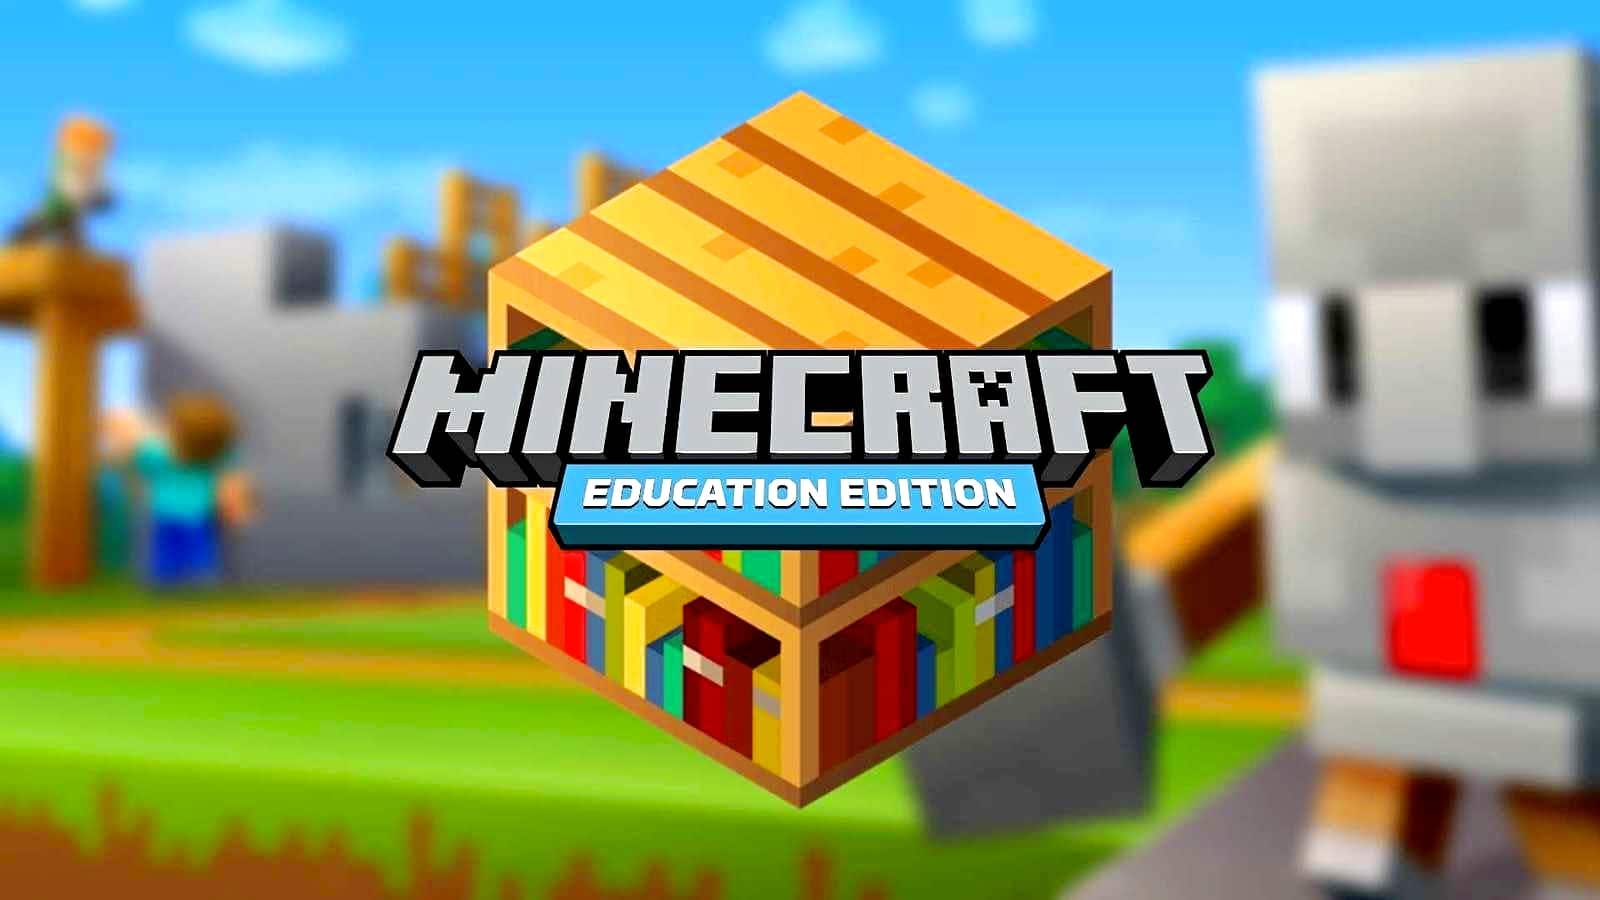 Minecraft for education